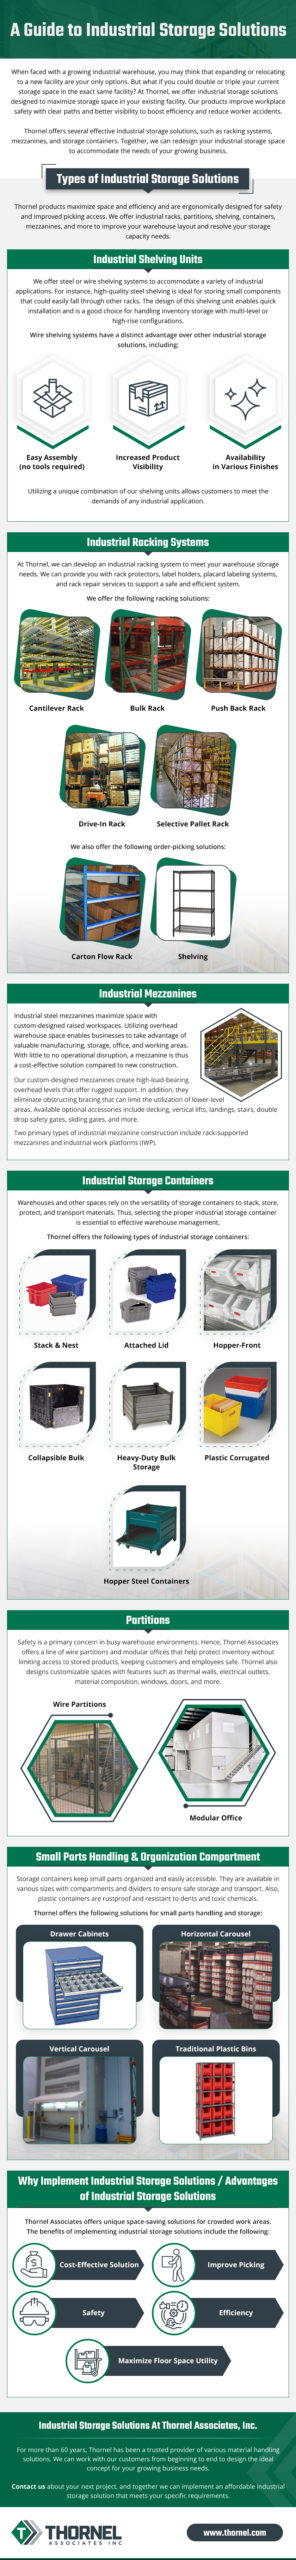 A-guide-to-industrial-storage-solutions” data-lazy-src=